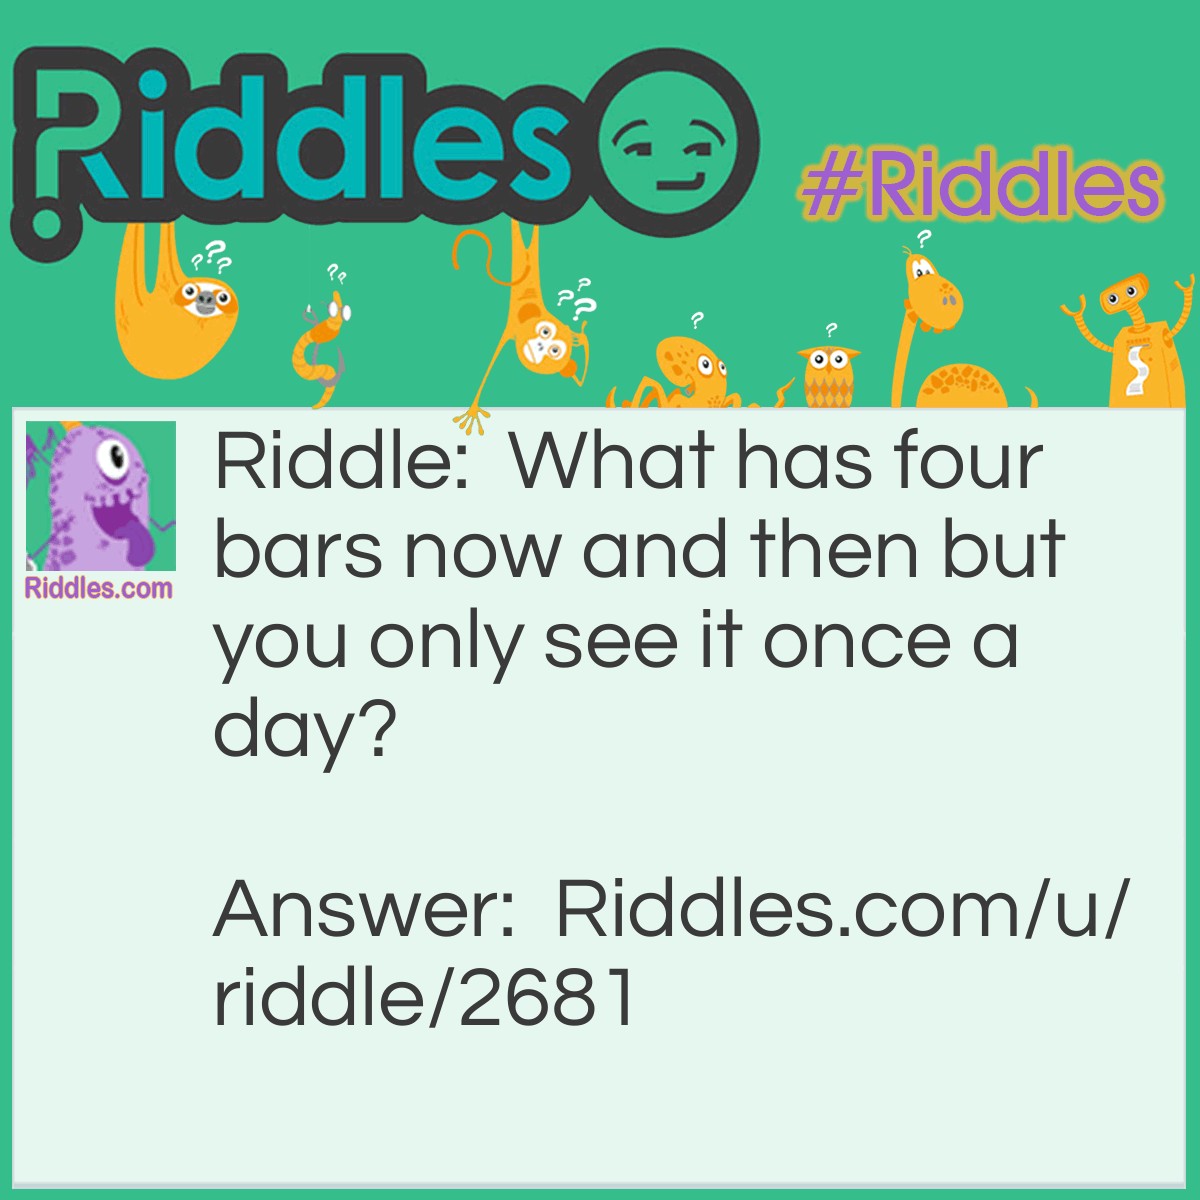 Riddle: What has four bars now and then but you only see it once a day? Answer: Wifi.